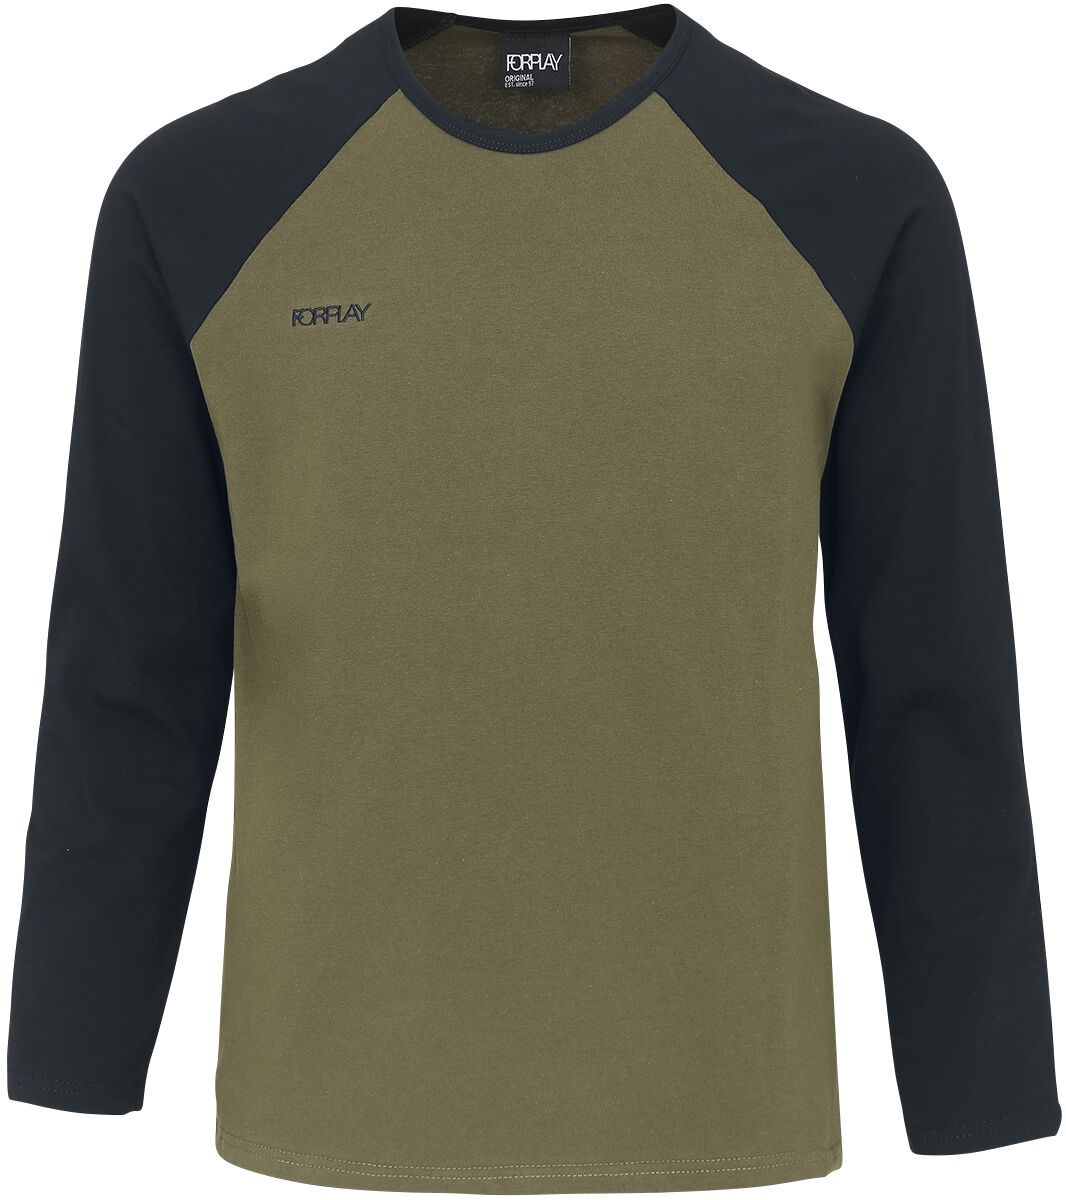 Forplay Jerry Long-sleeve Shirt olive black